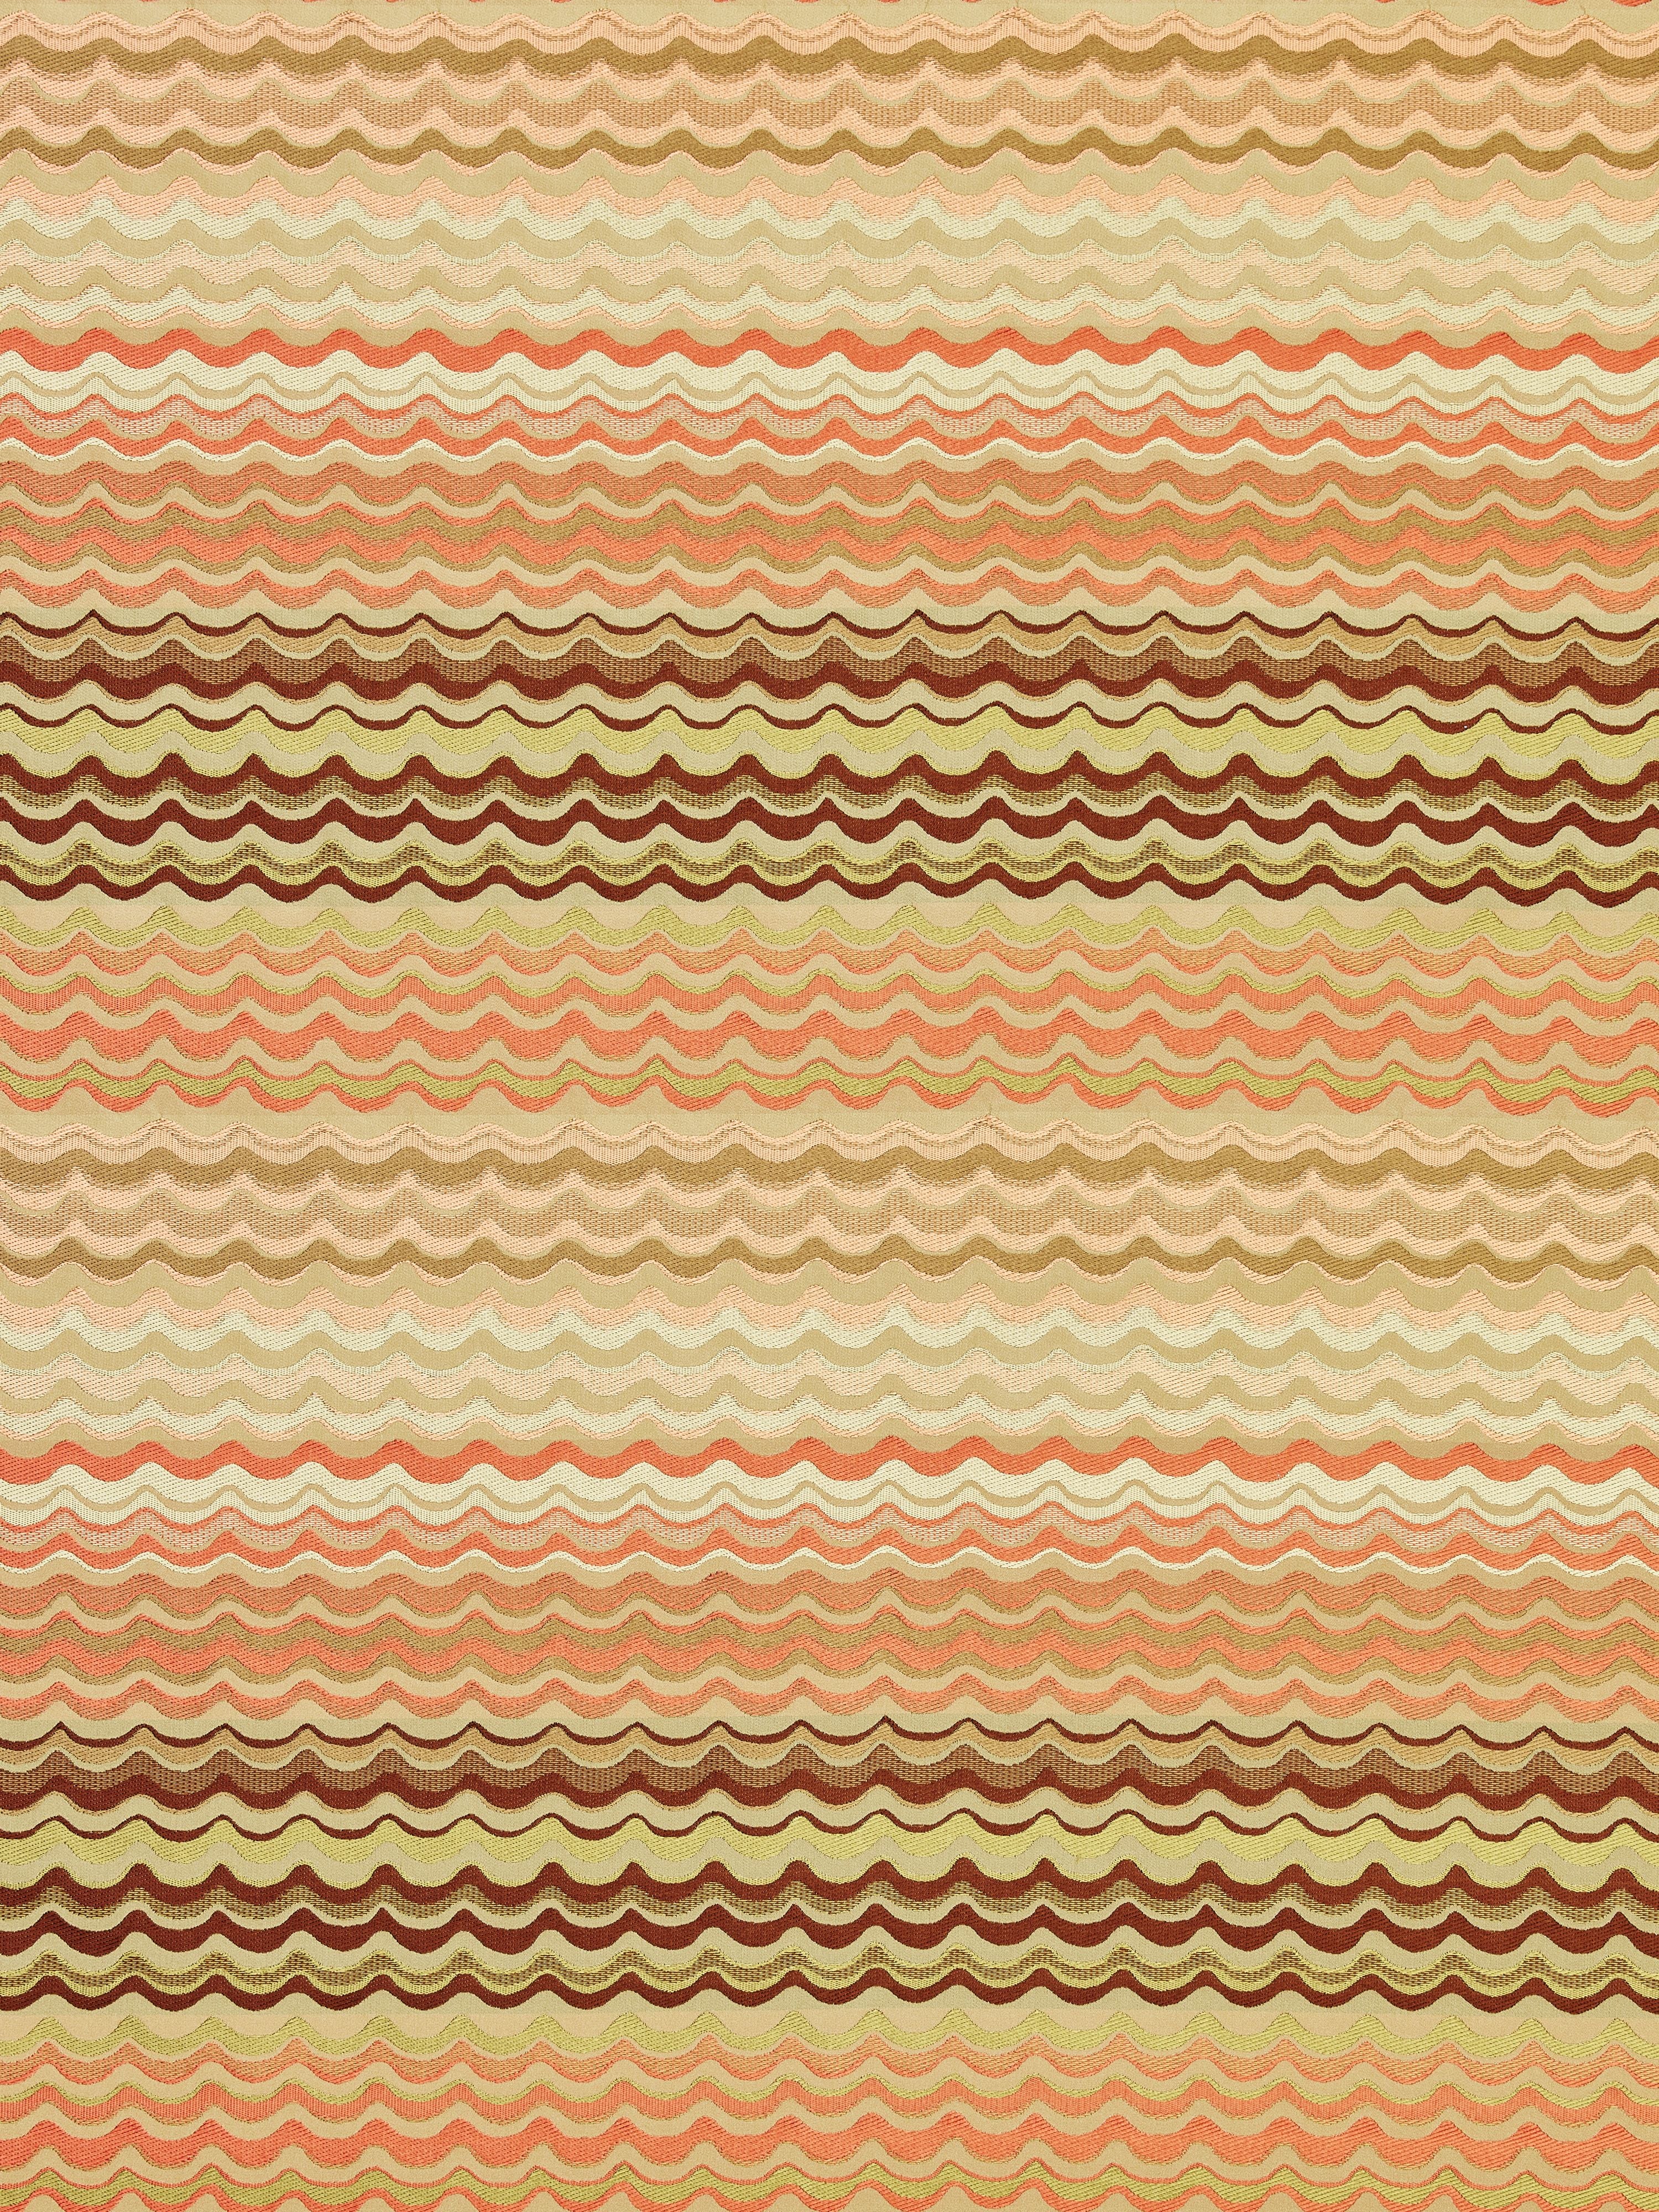 New Wave fabric in coral color - pattern number AB 00026512 - by Scalamandre in the Old World Weavers collection